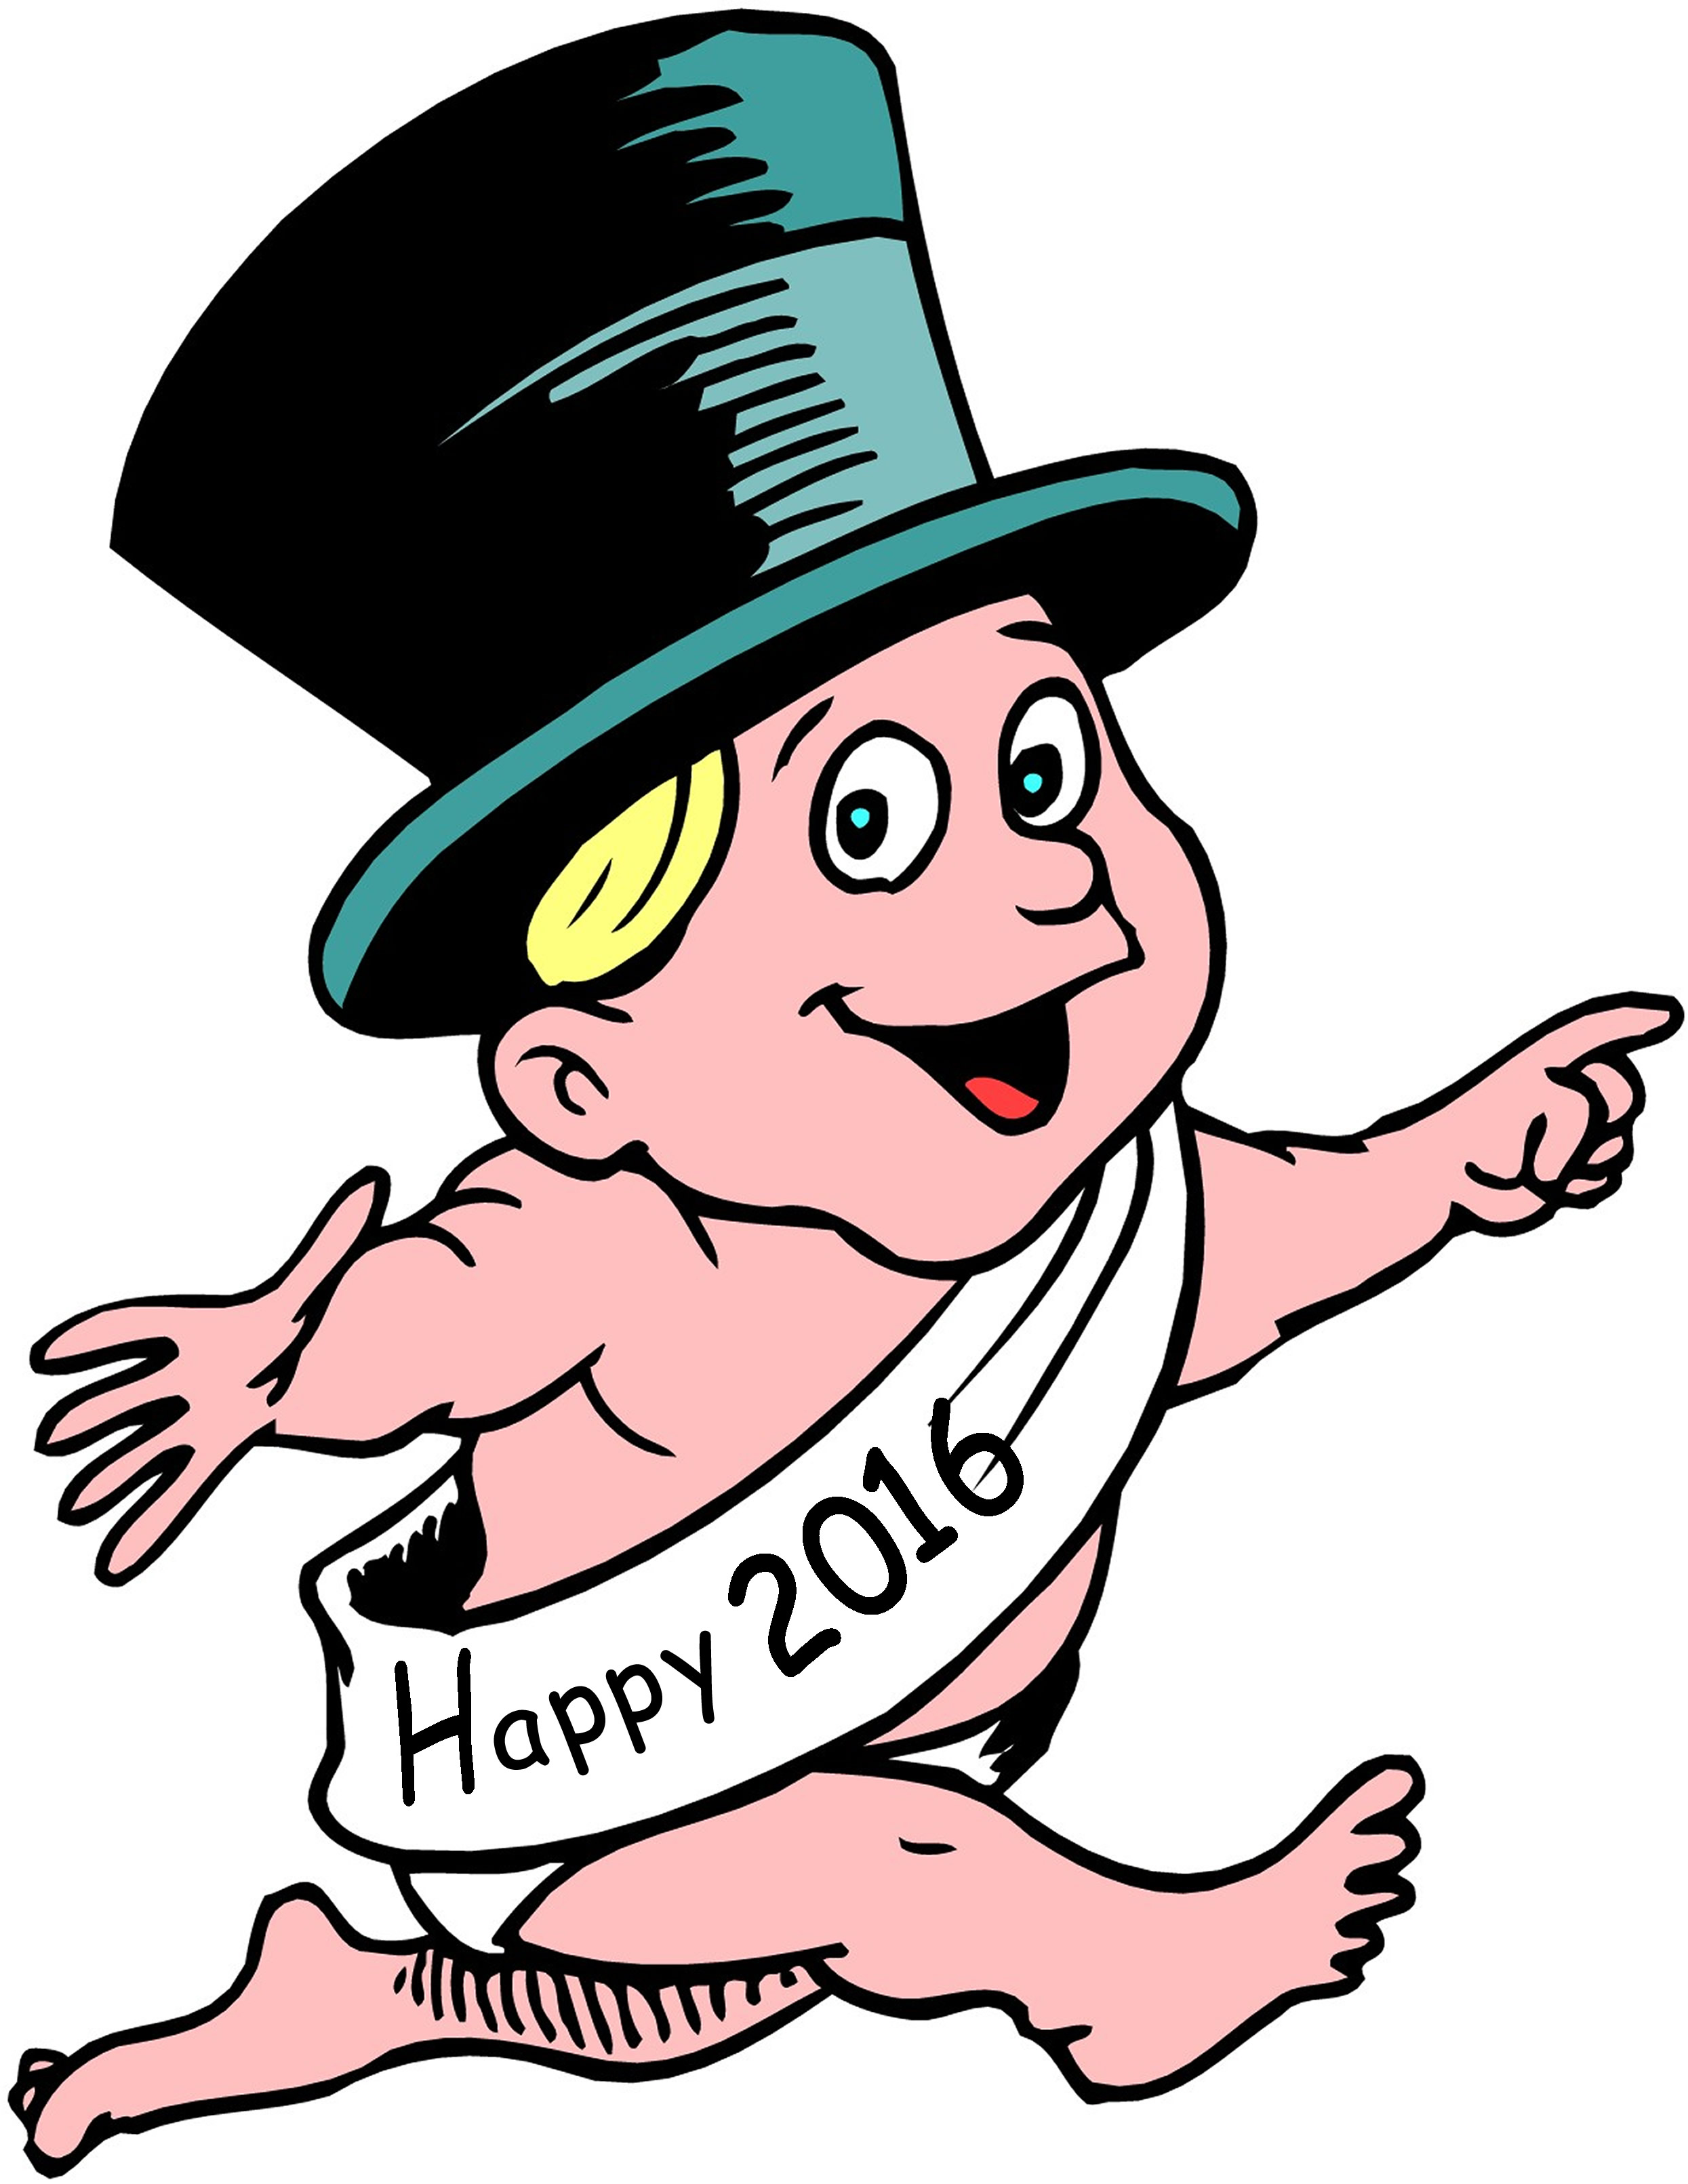 New Year 2015 16 Graphics Clipart   New Year 2015 And 2016 Graphics    